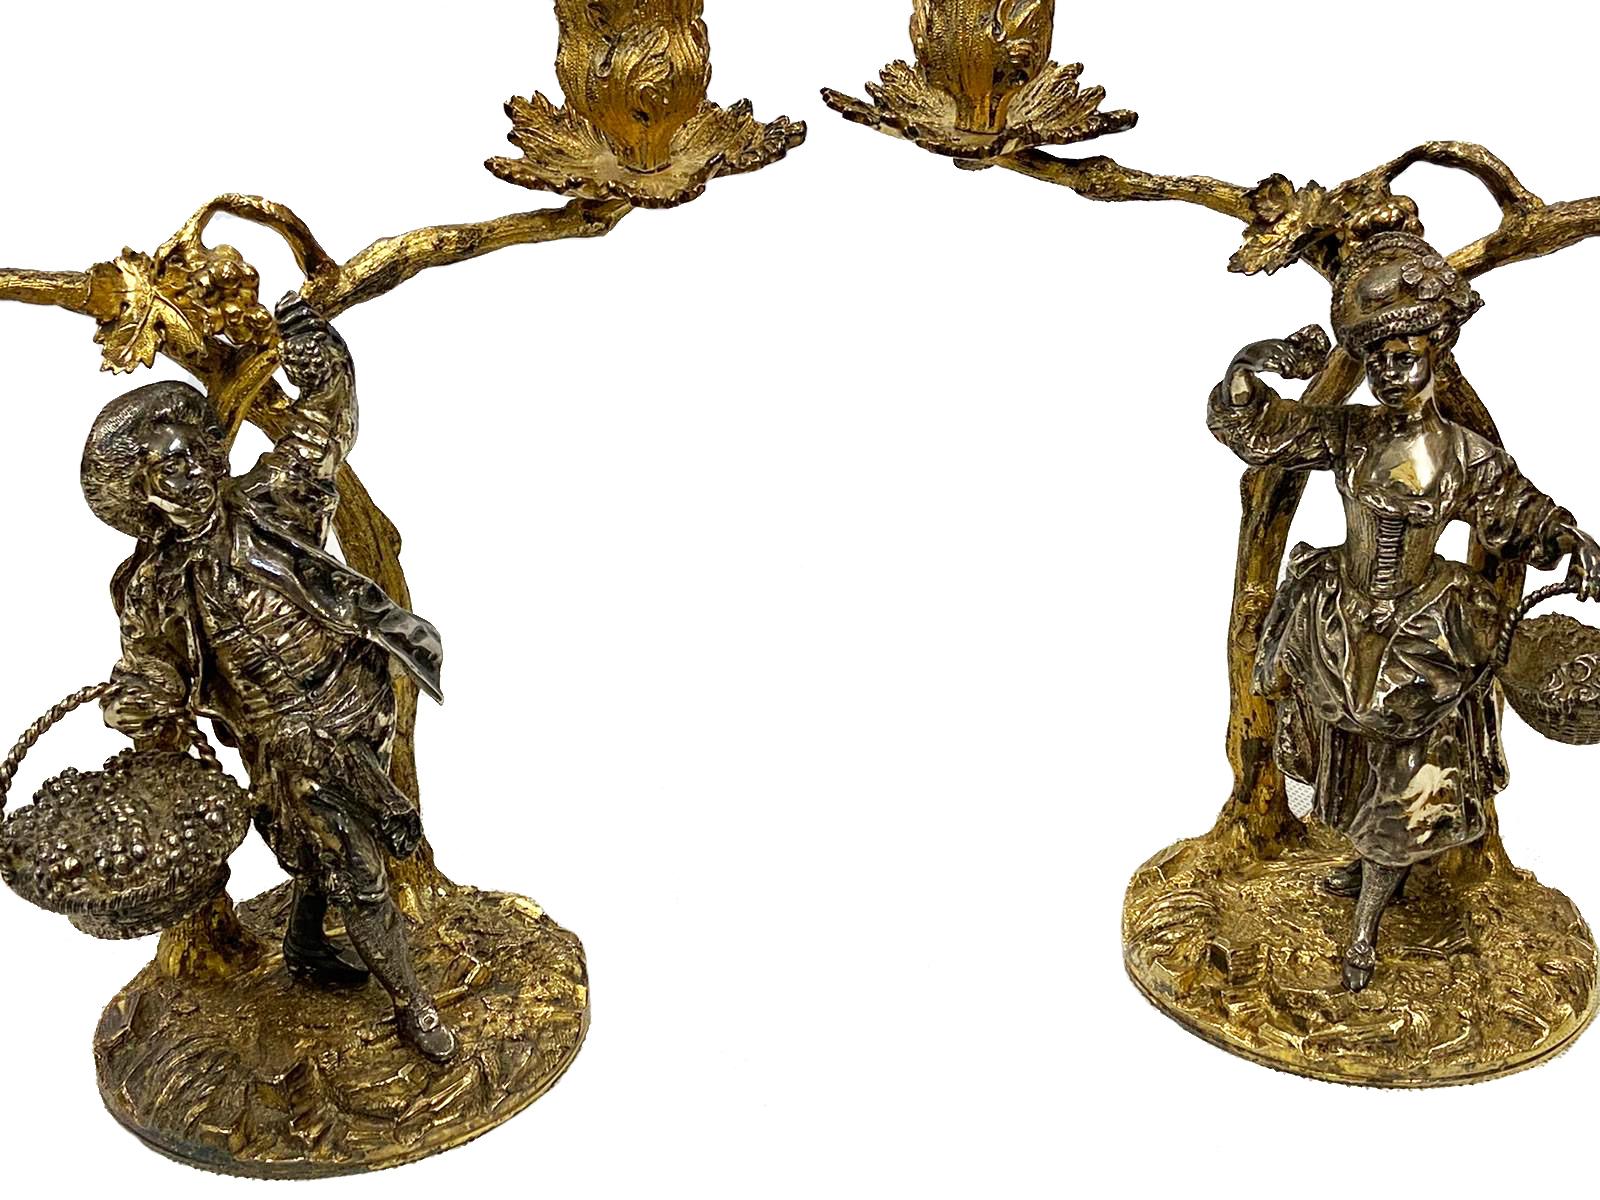 A fine quality pair of solid silver and gilt candelabras, by Aspreys of London, 20th century, depicting chanting lovers picking fruit under branches.
Weighing 88oz (2737 grams). Measures: 8.5” (22 cm).